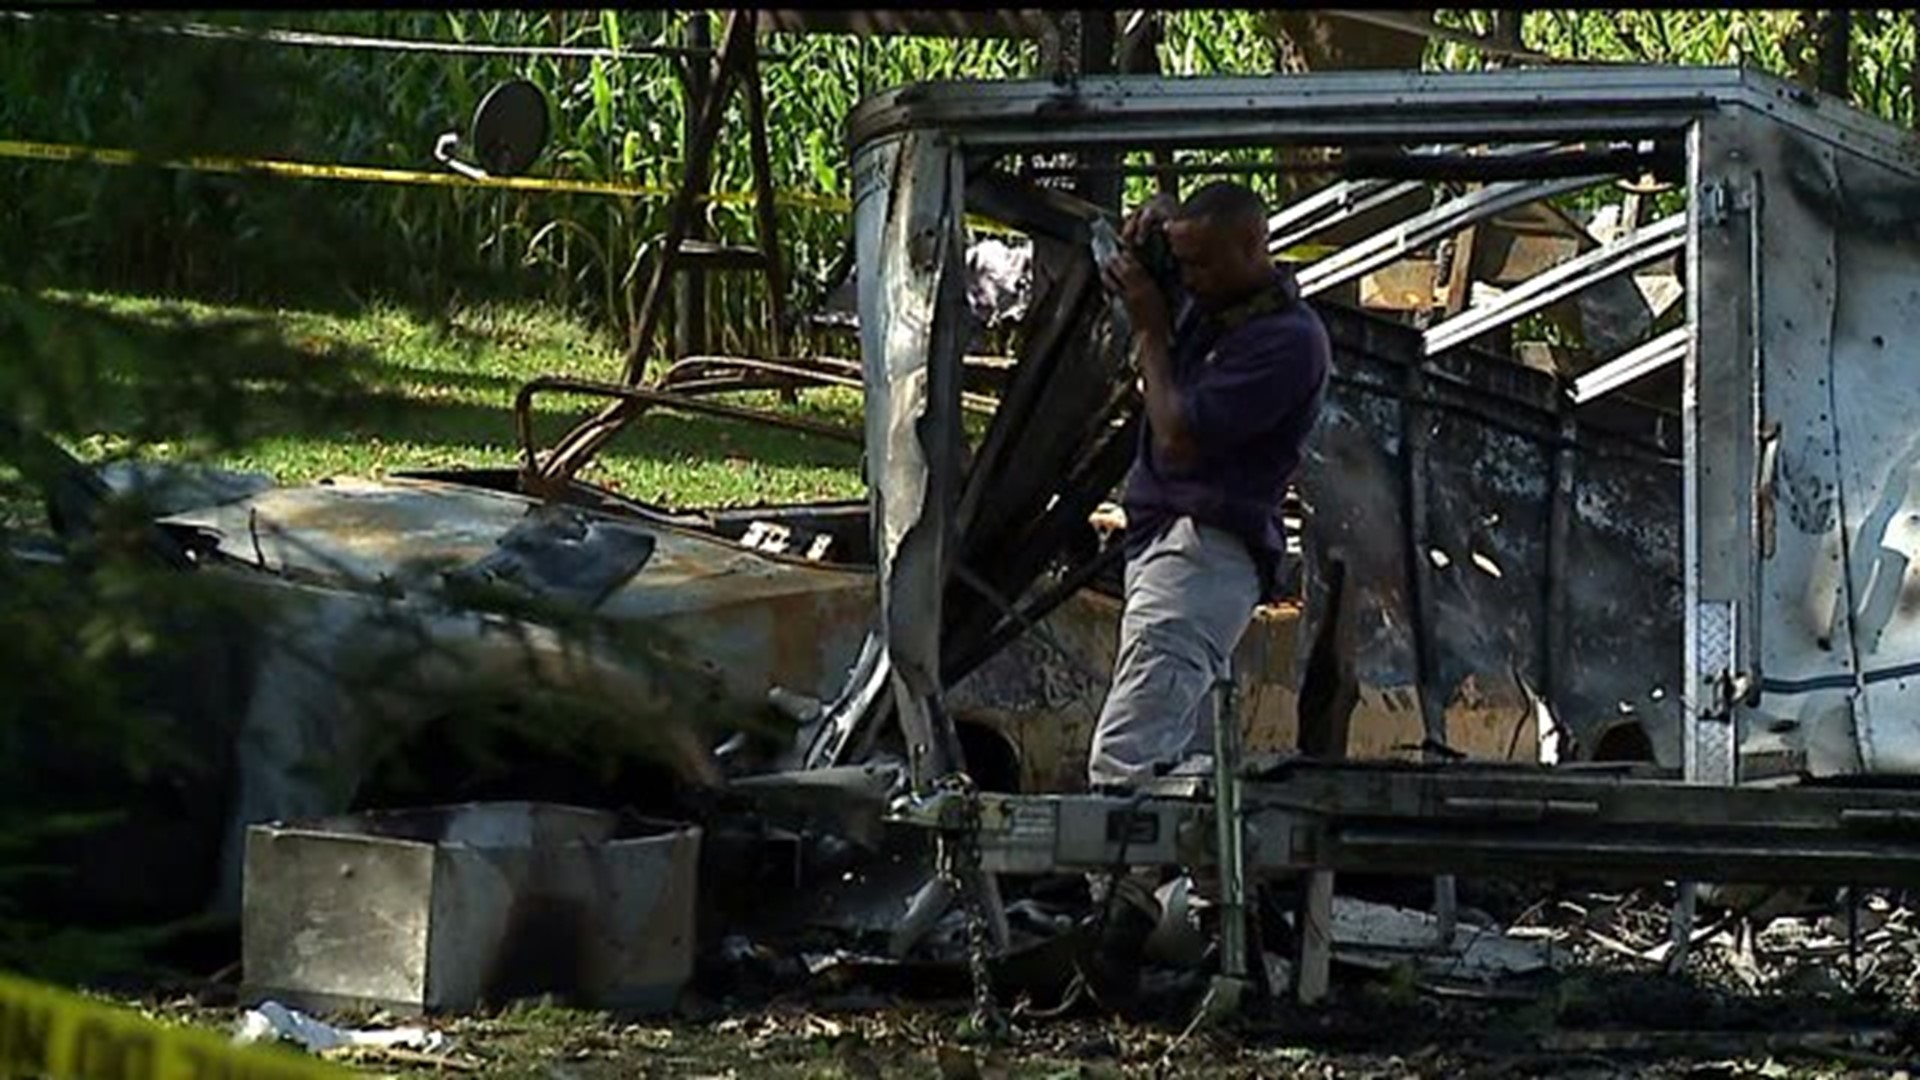 ATF Agents investigate weekend fire that caused fireworks to explode